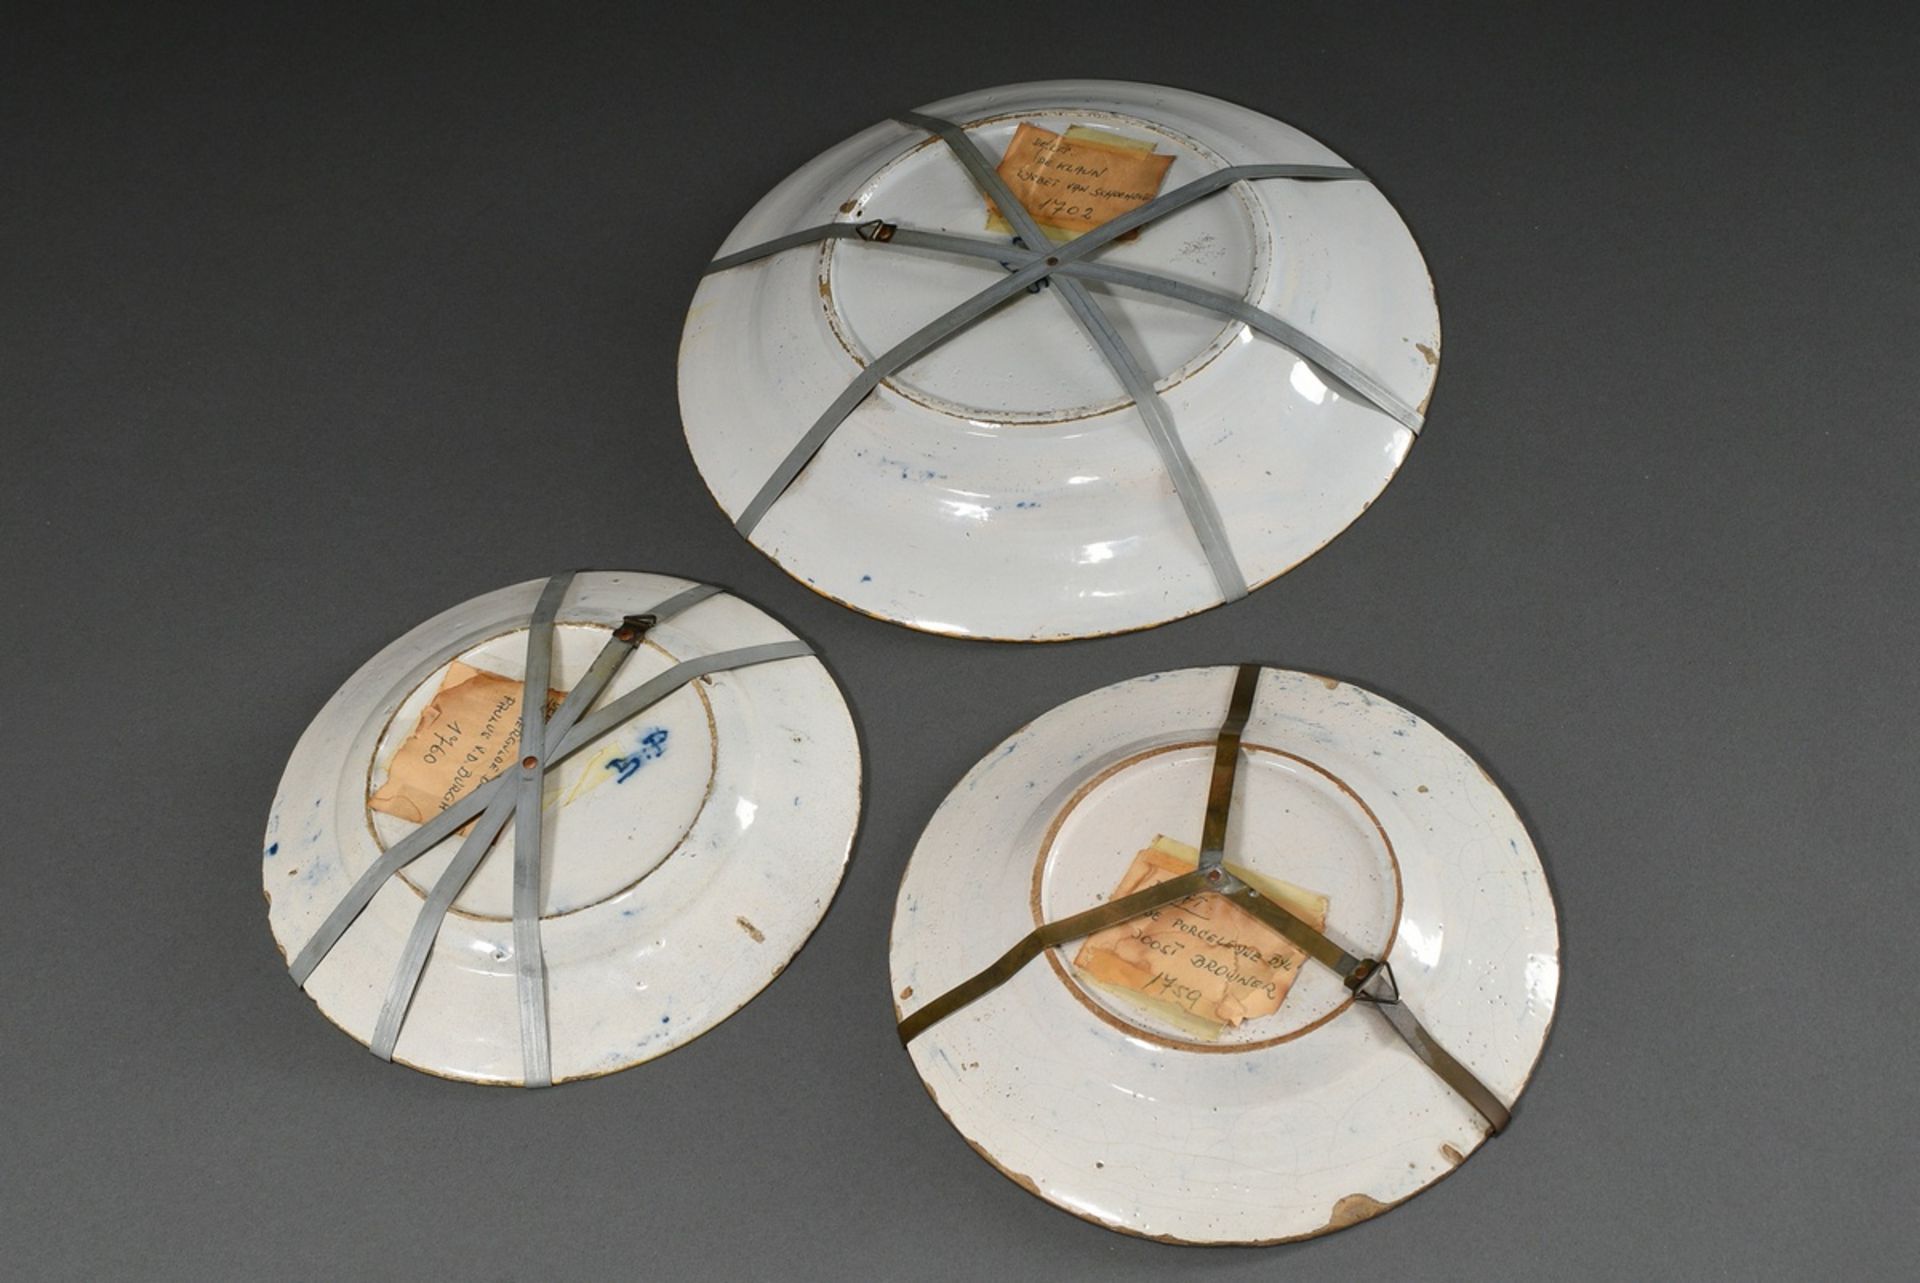 3 Various Delft "Peacock plates" with blue painting decoration and yellow rim: 1x De verguldte Bloe - Image 3 of 5